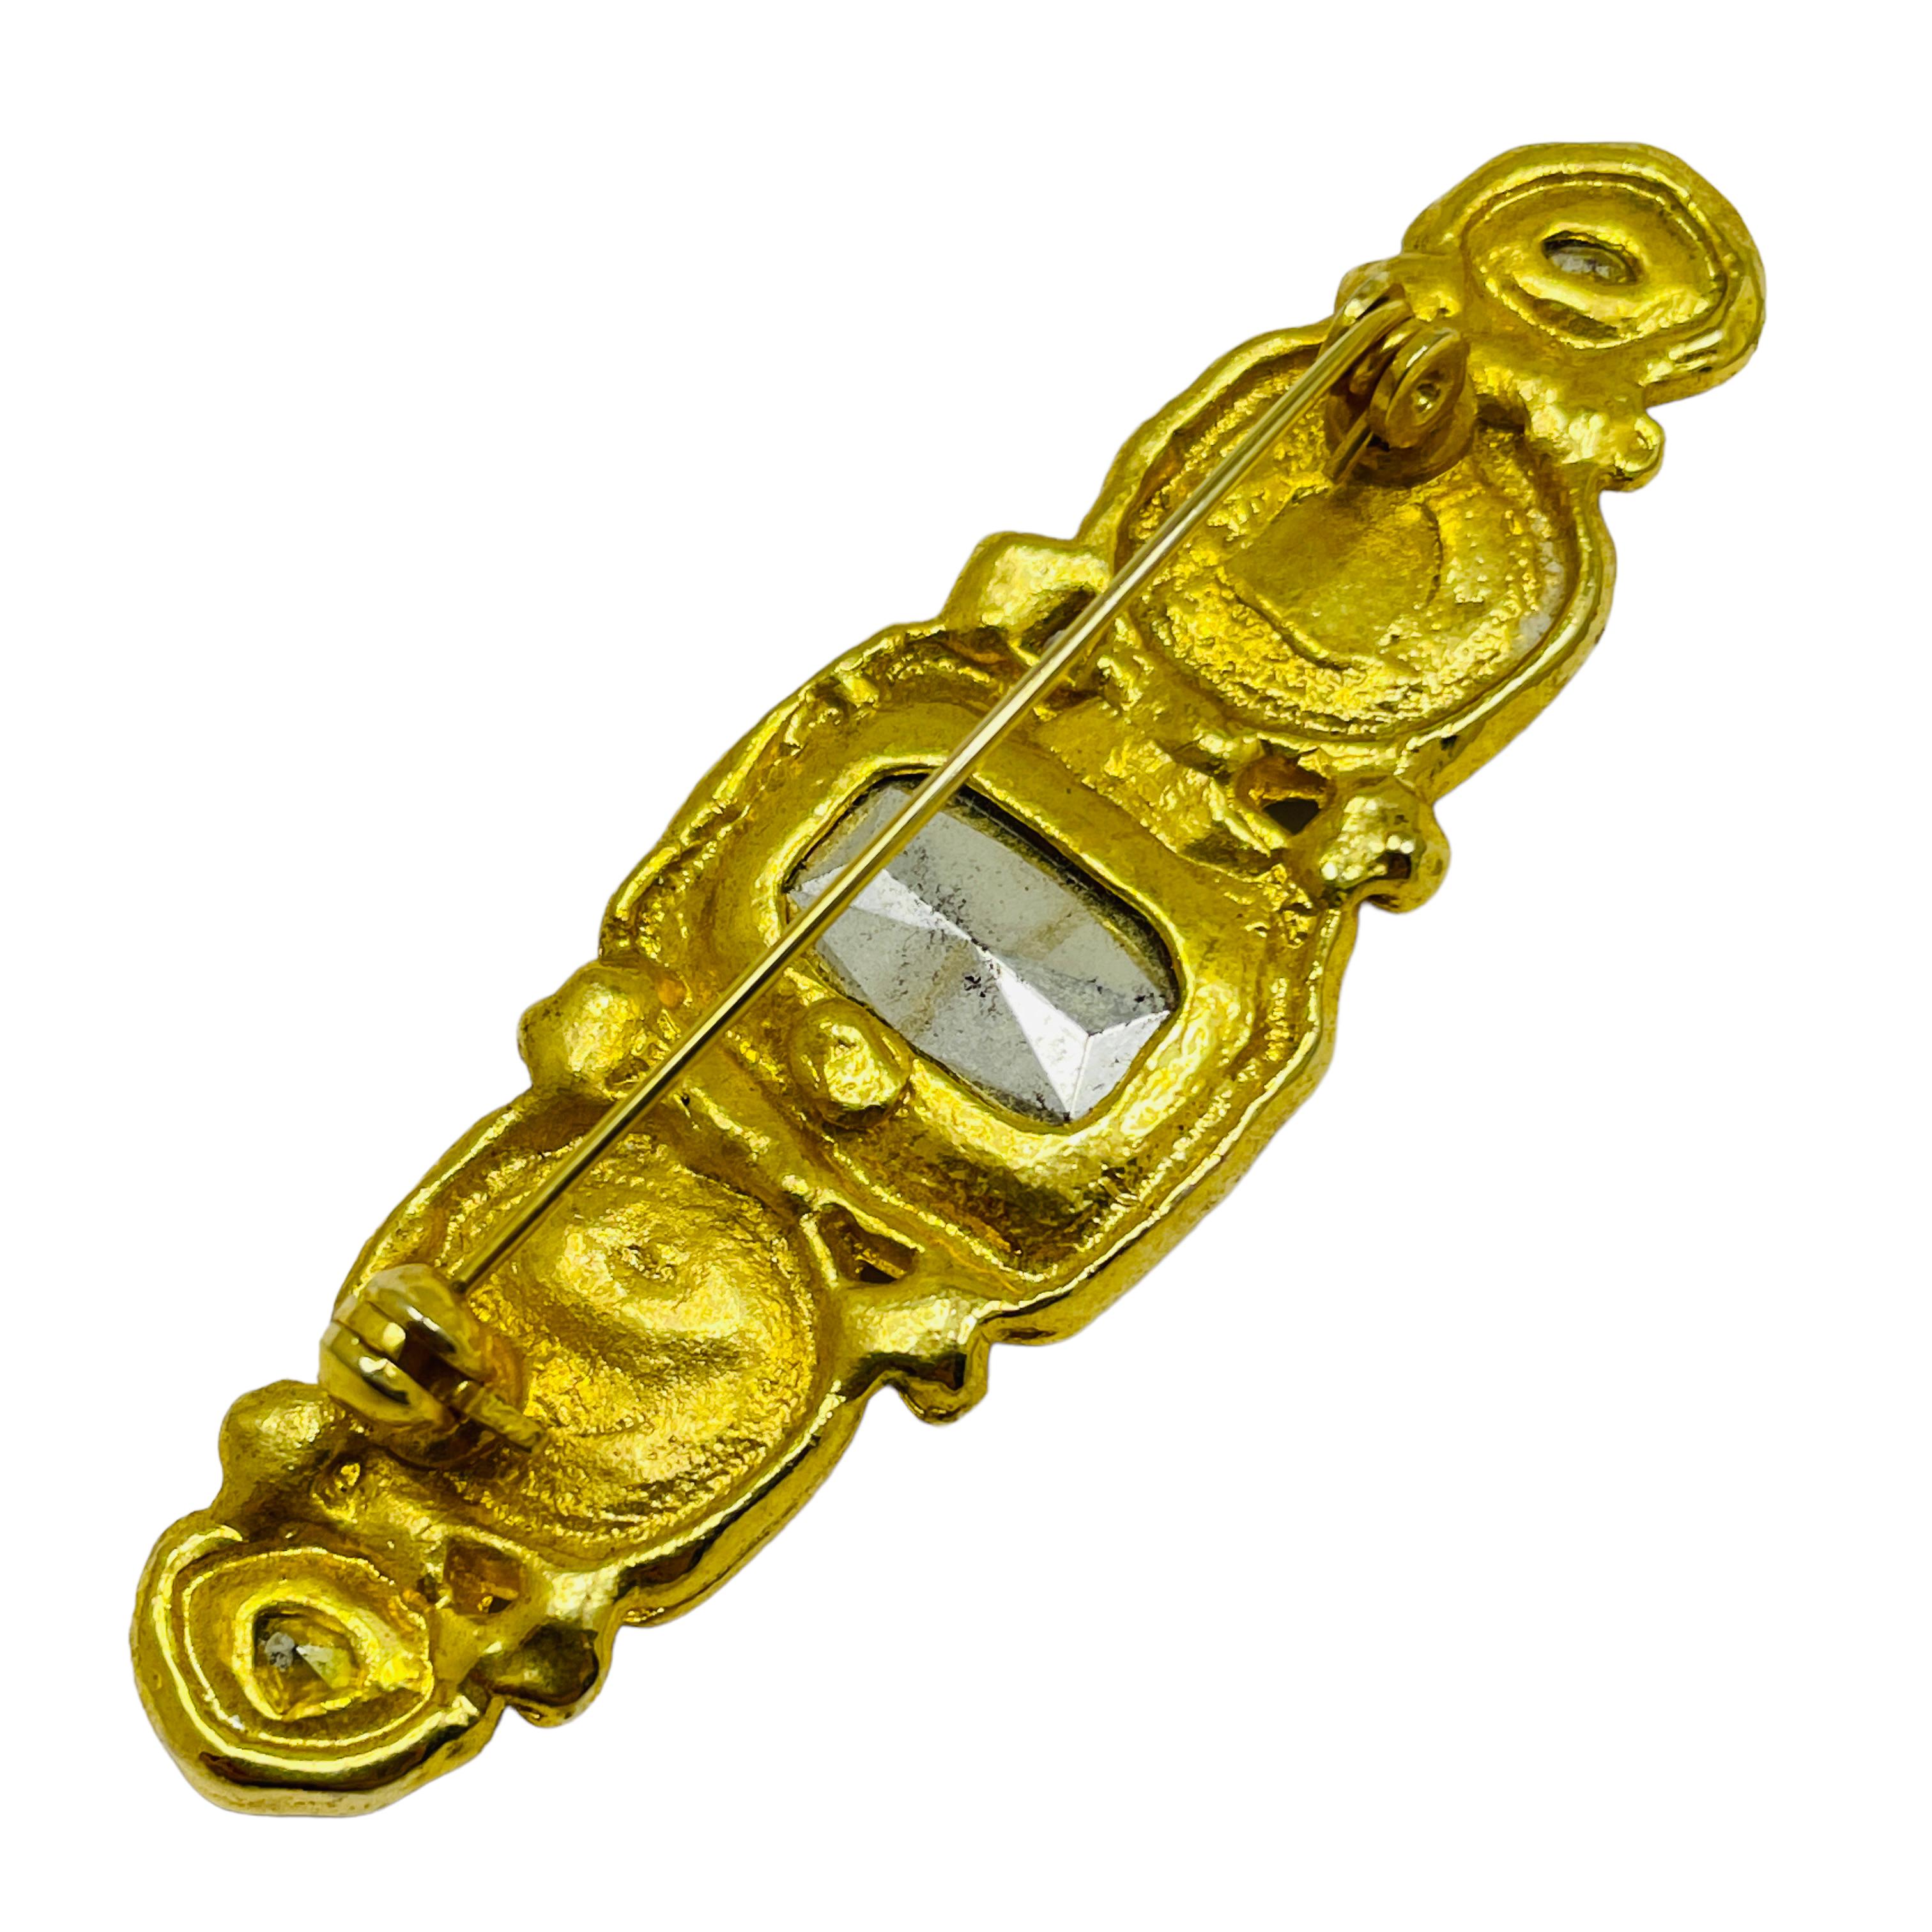 Vintage gold jewel resin stones designer brooch In Good Condition For Sale In Palos Hills, IL